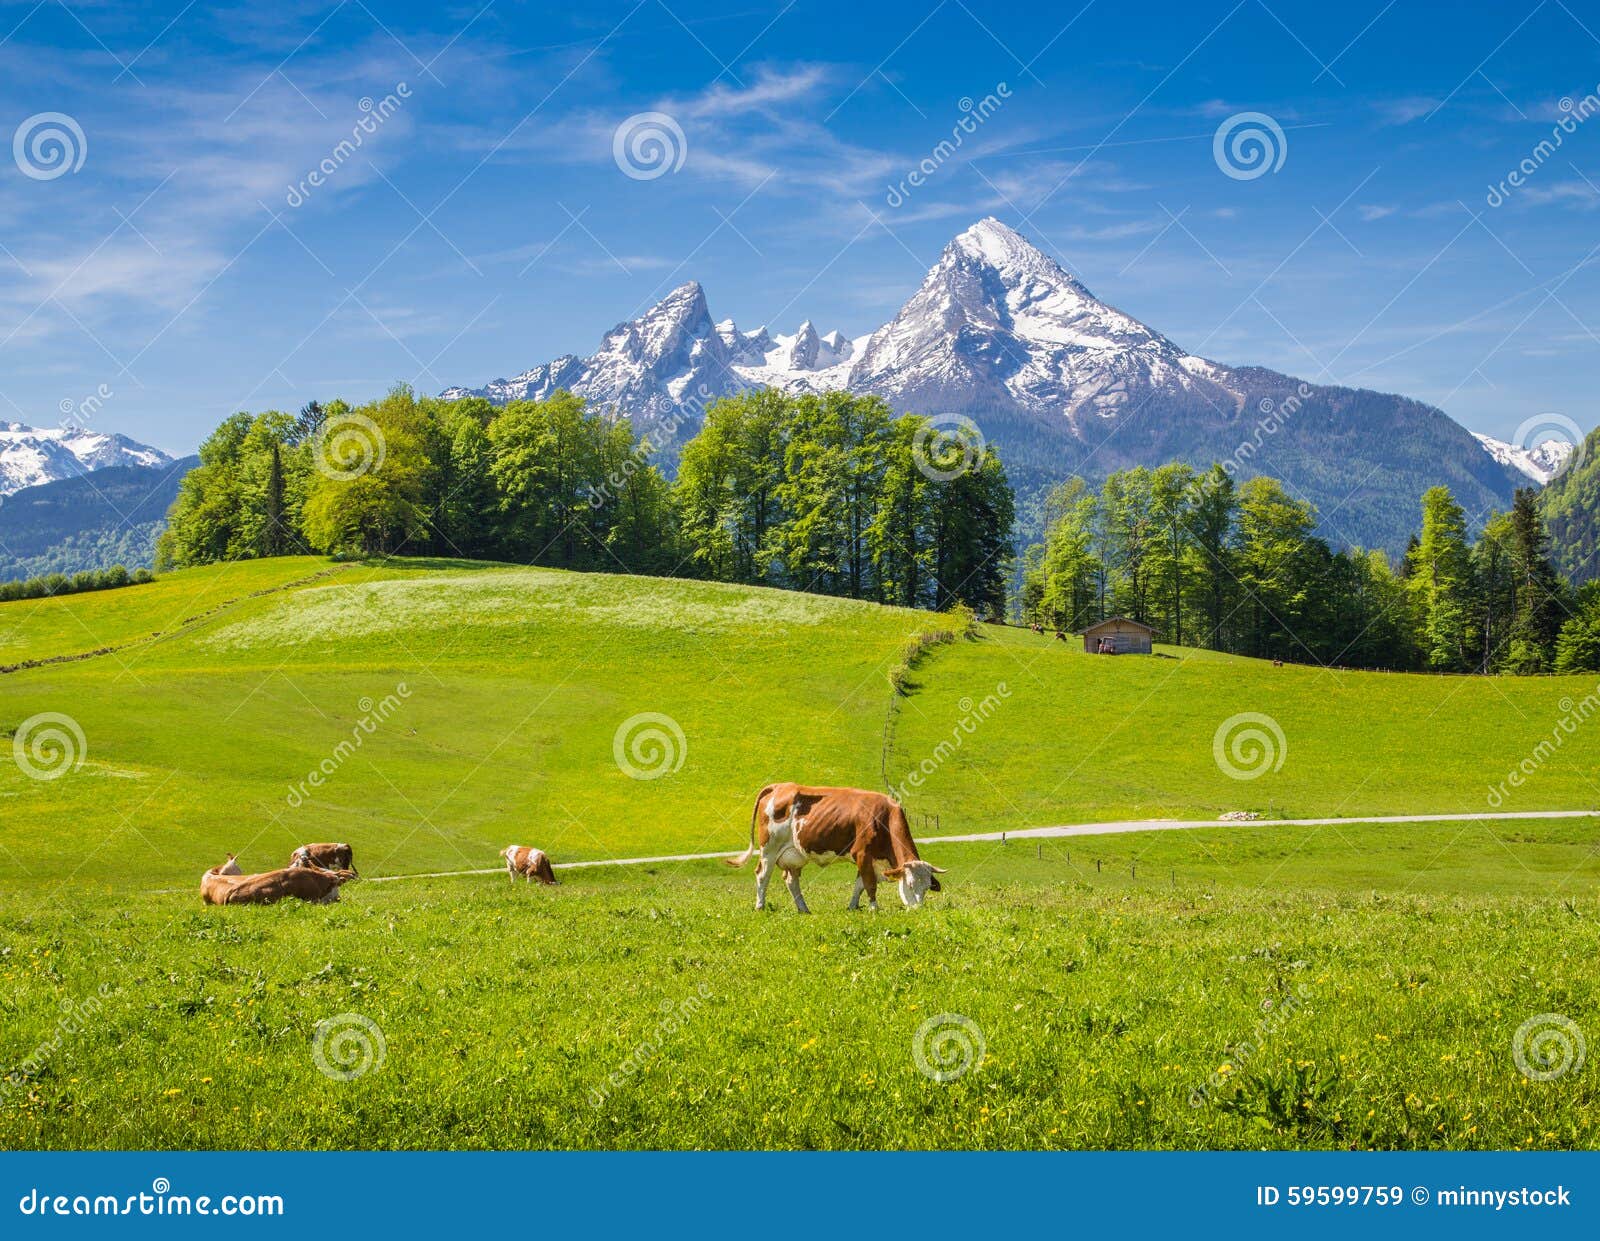 idyllic landscape in the alps with cow grazing on fresh green mountain pastures